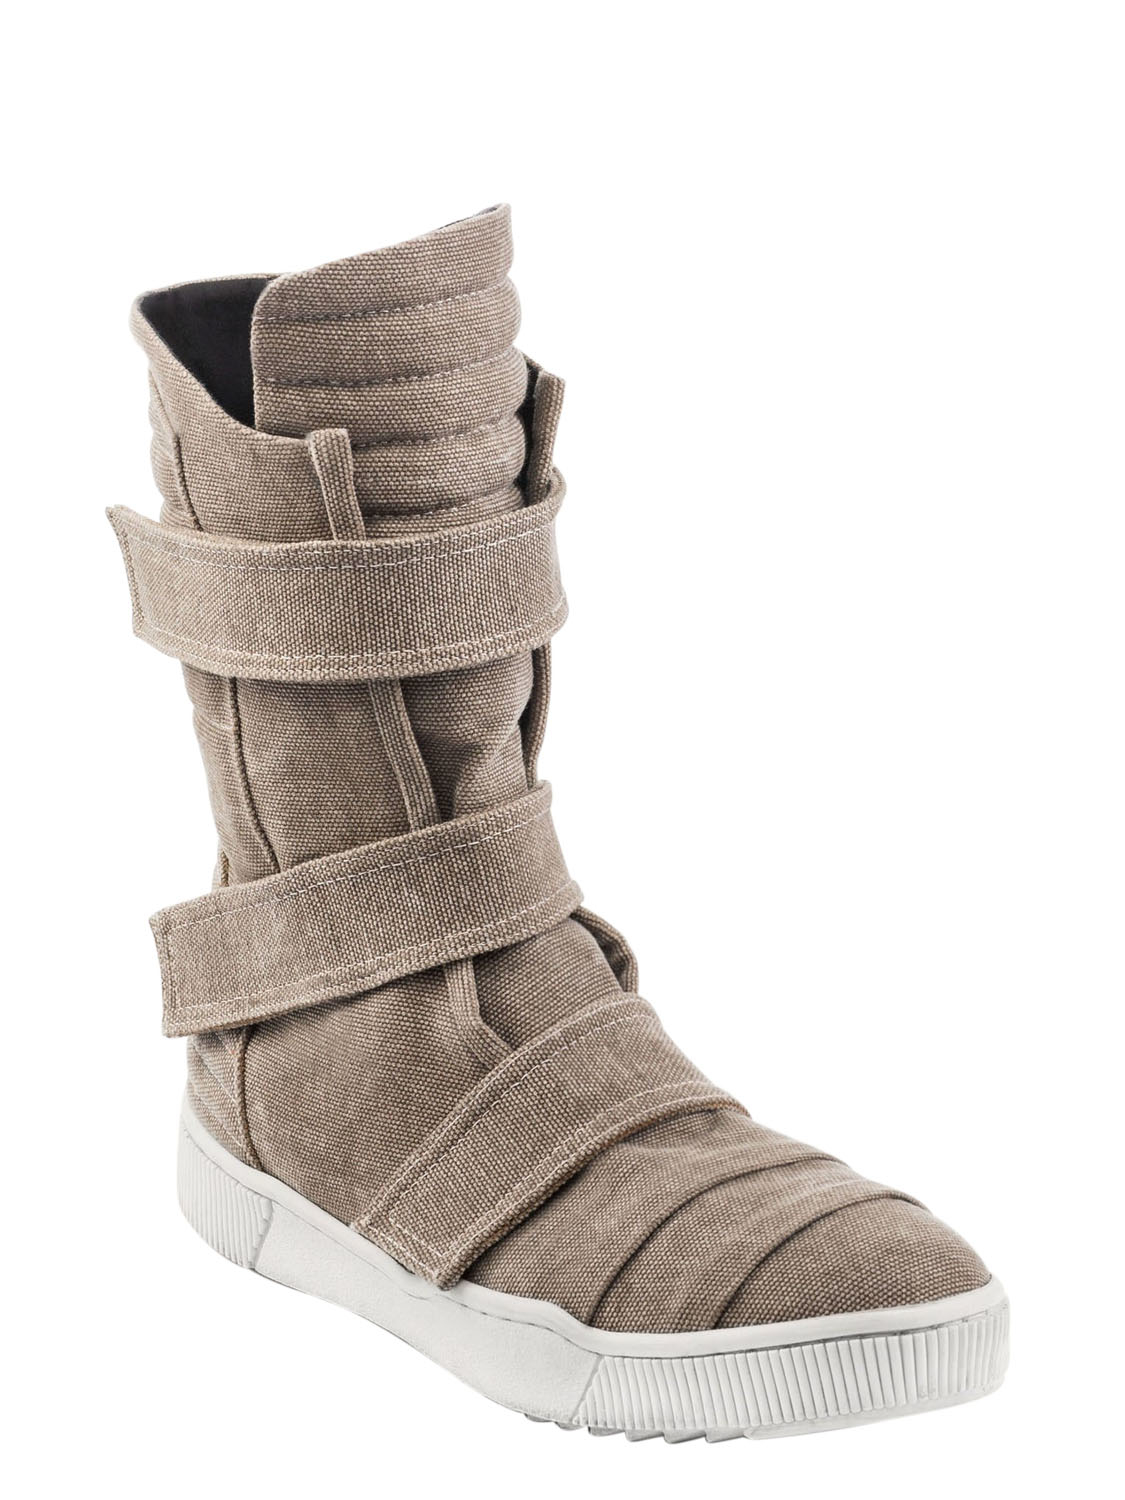 Demobaza Cotton Canvas Velcro Sneaker Boots in Natural for Men | Lyst UK